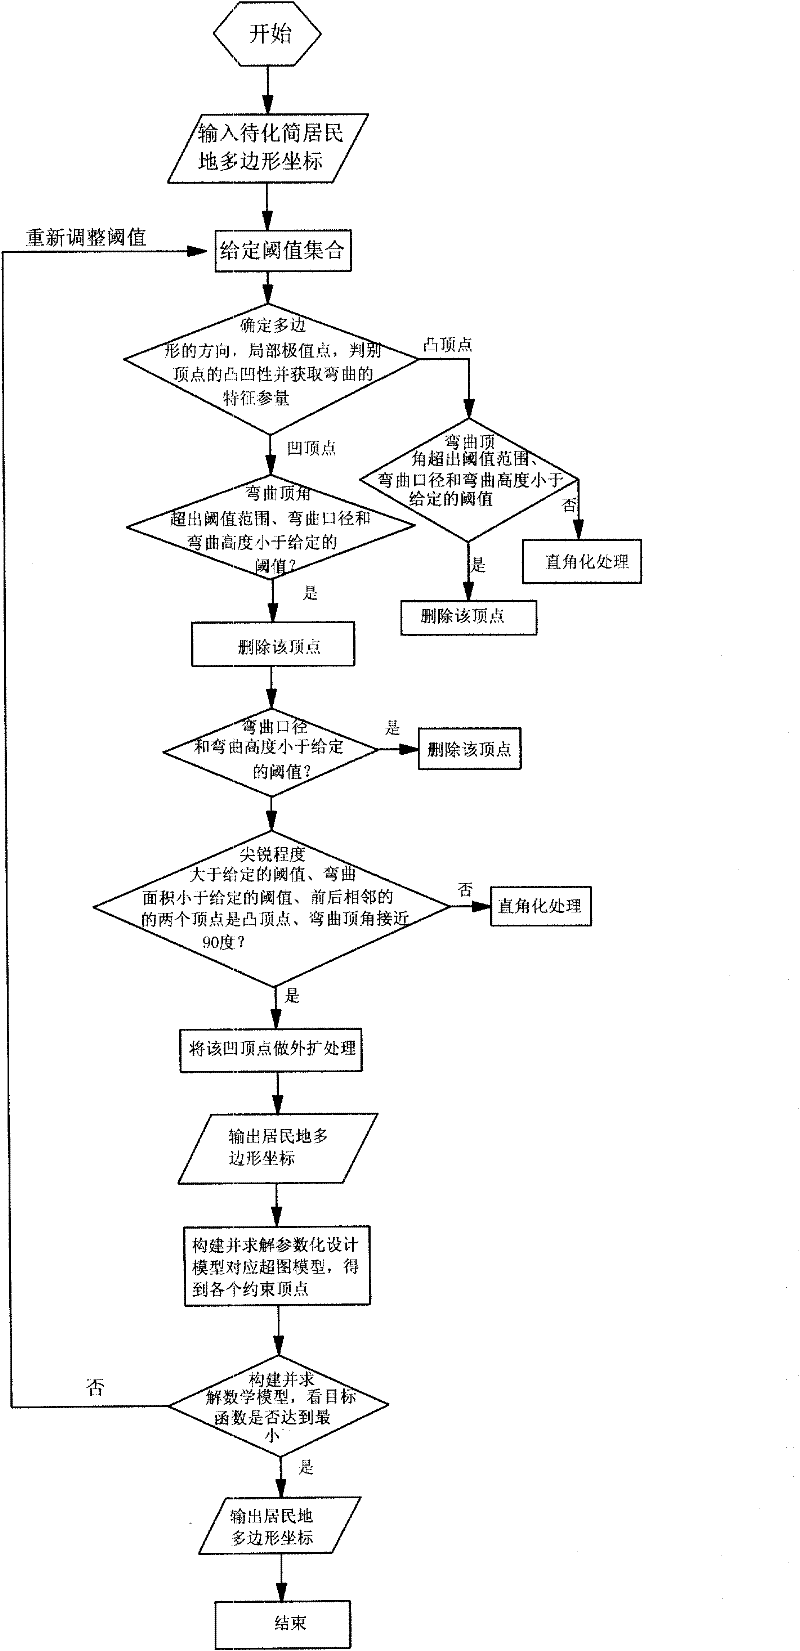 Method for simplifying numerical map settlement place polygon by utilizing parametric design model